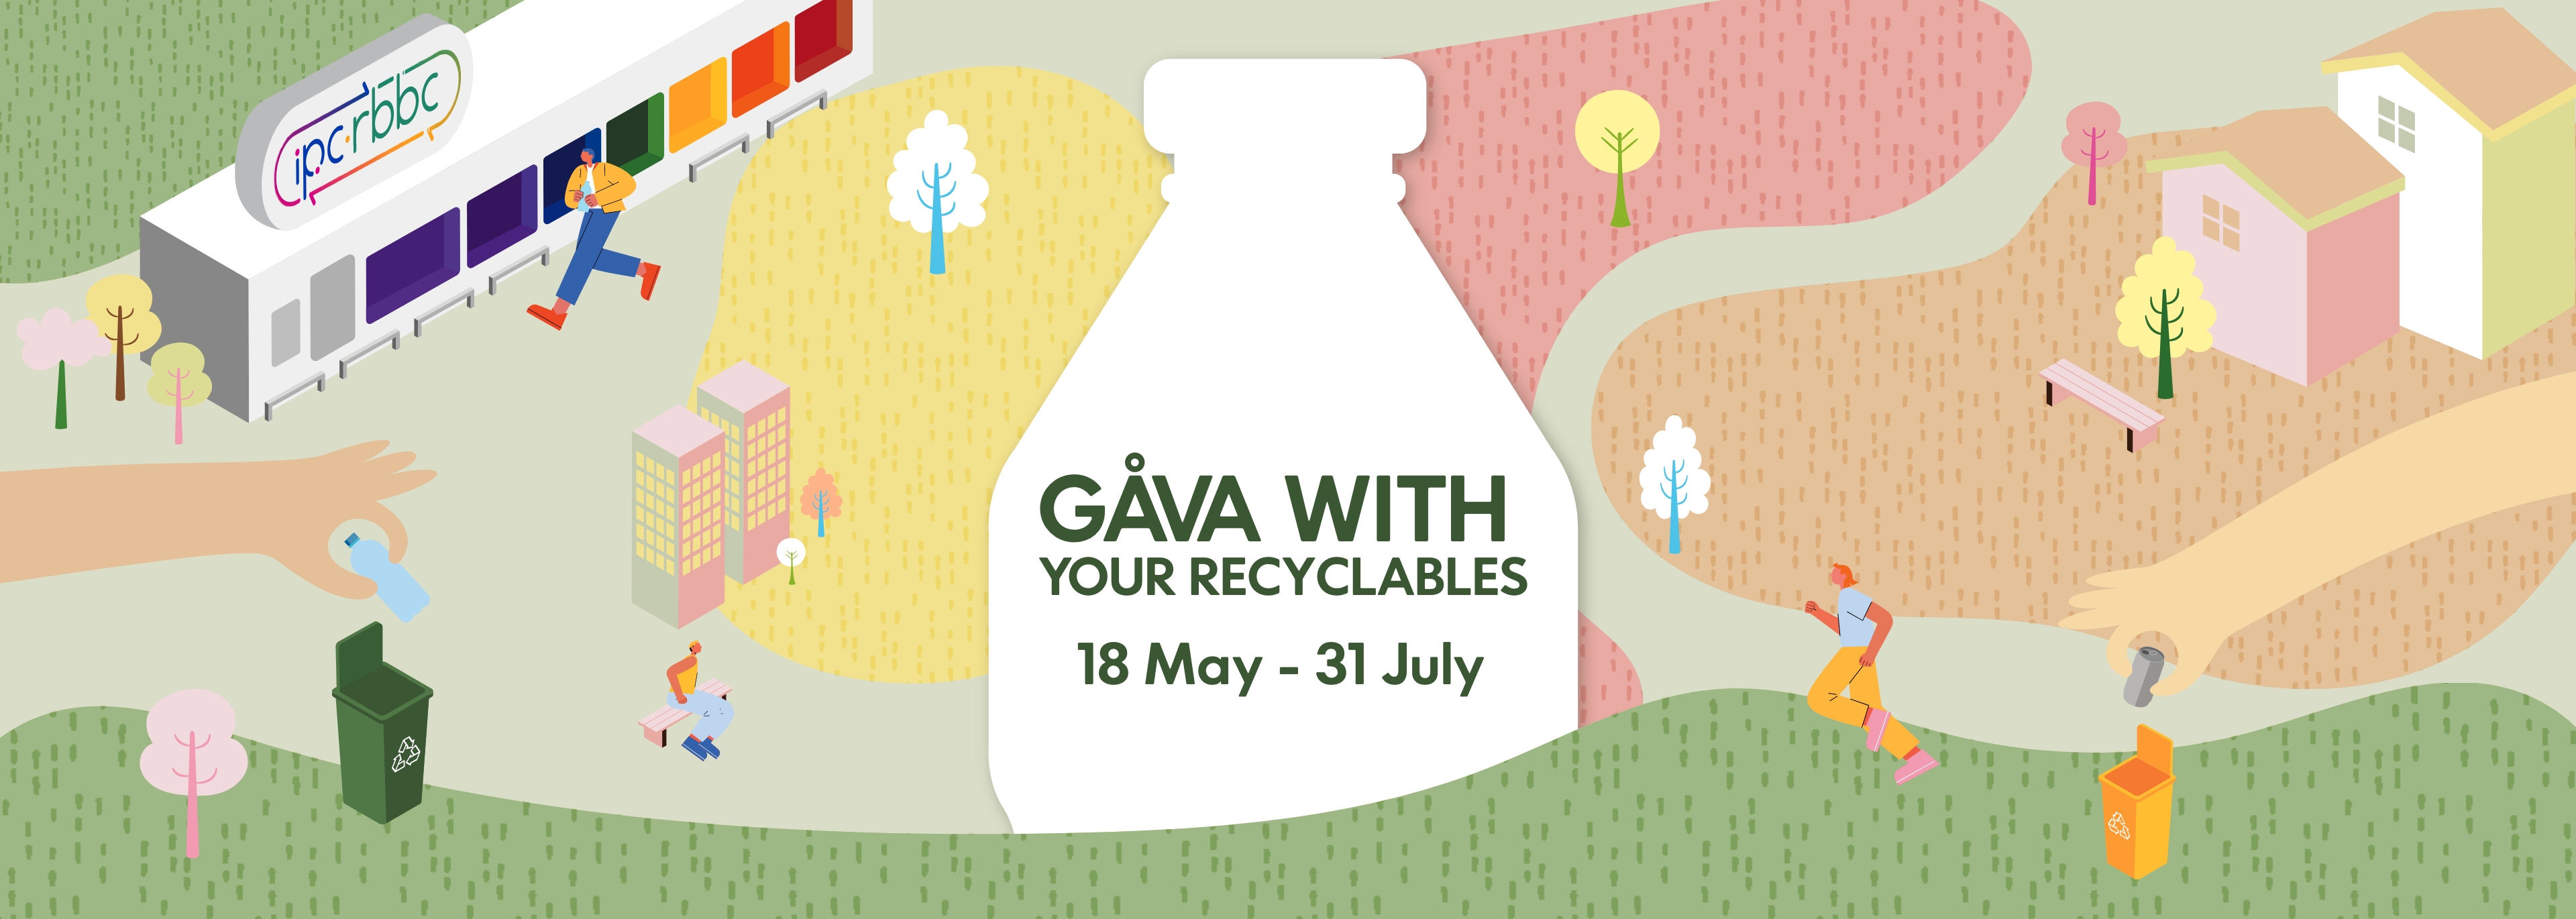 Gava With Your Recycles